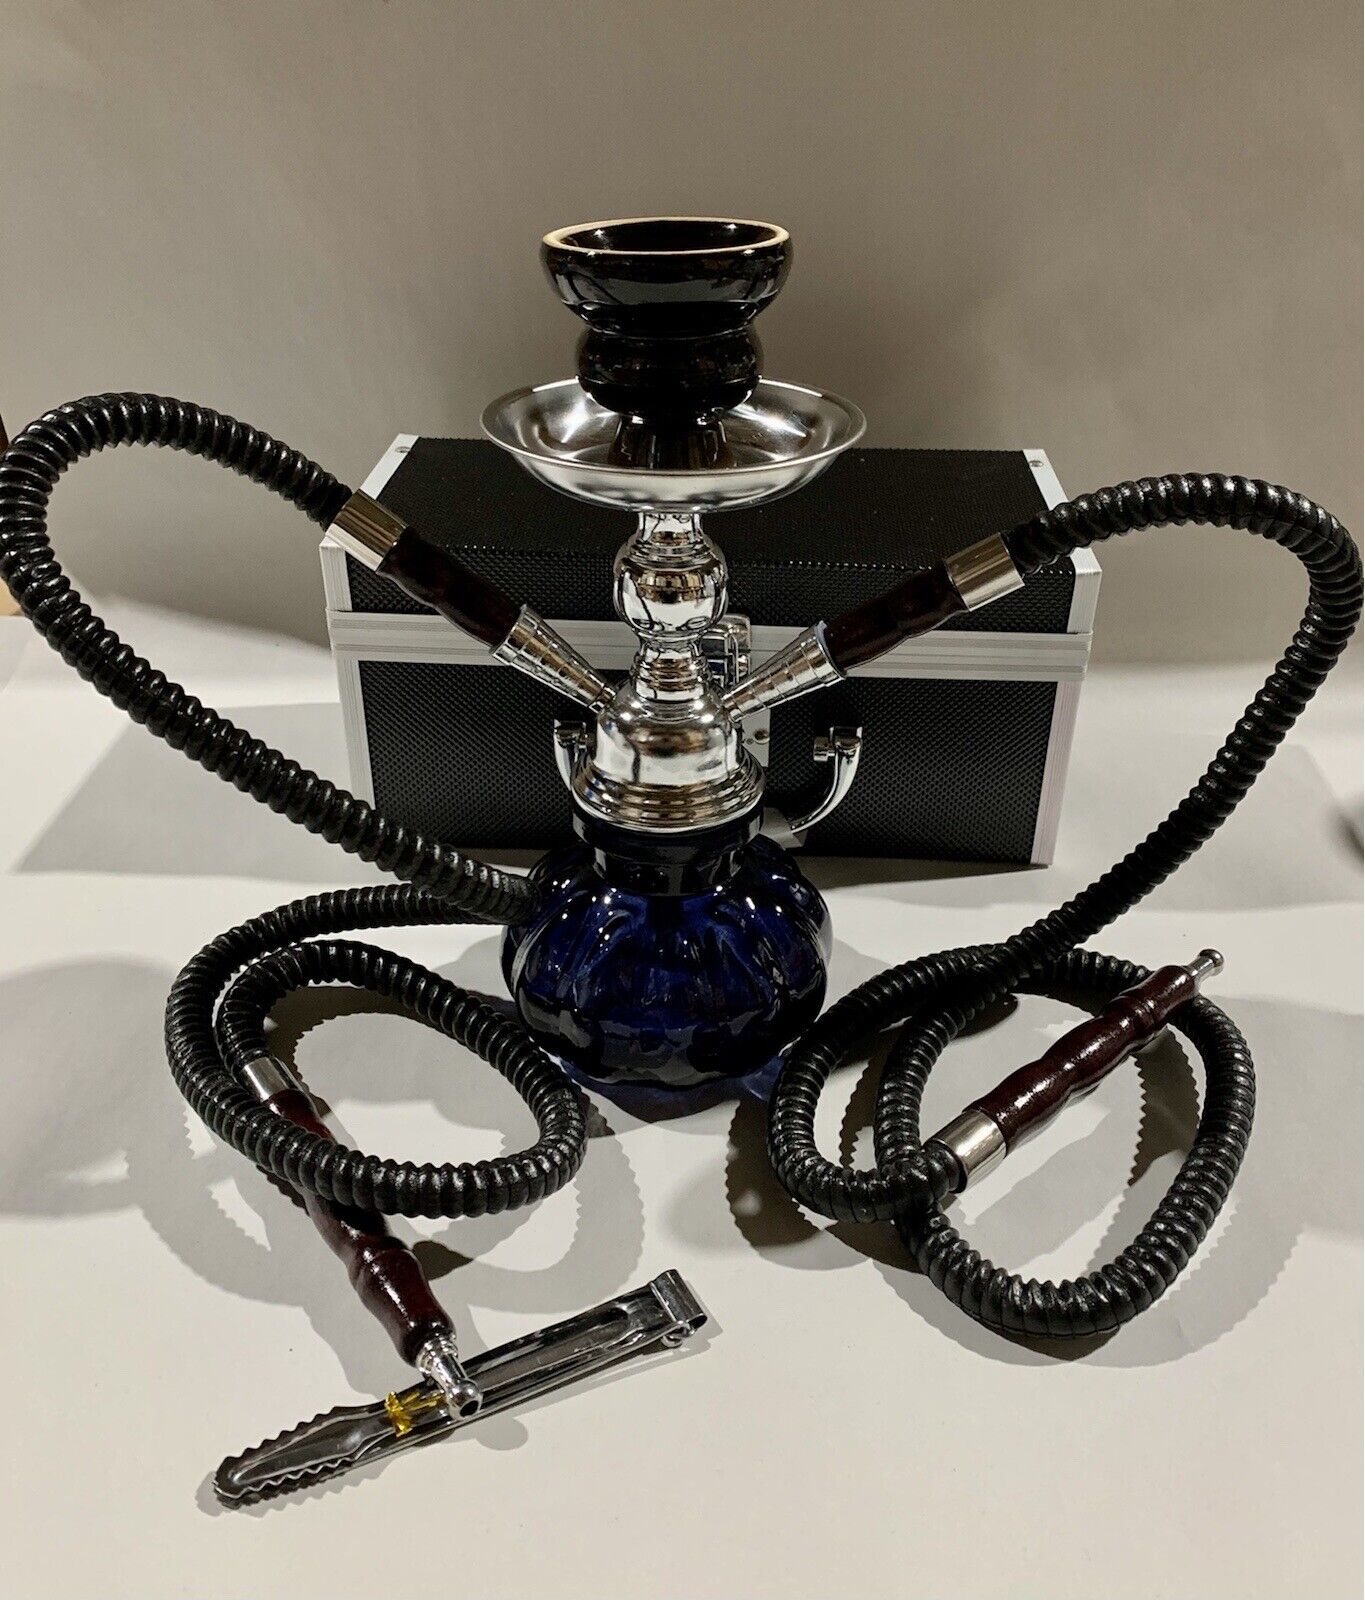 INHALE®️10 INCH 2 HOSE AVALANCHE  SMALL PUMPKIN HOOKAH IN A HARD SUITCASE(BLACK)